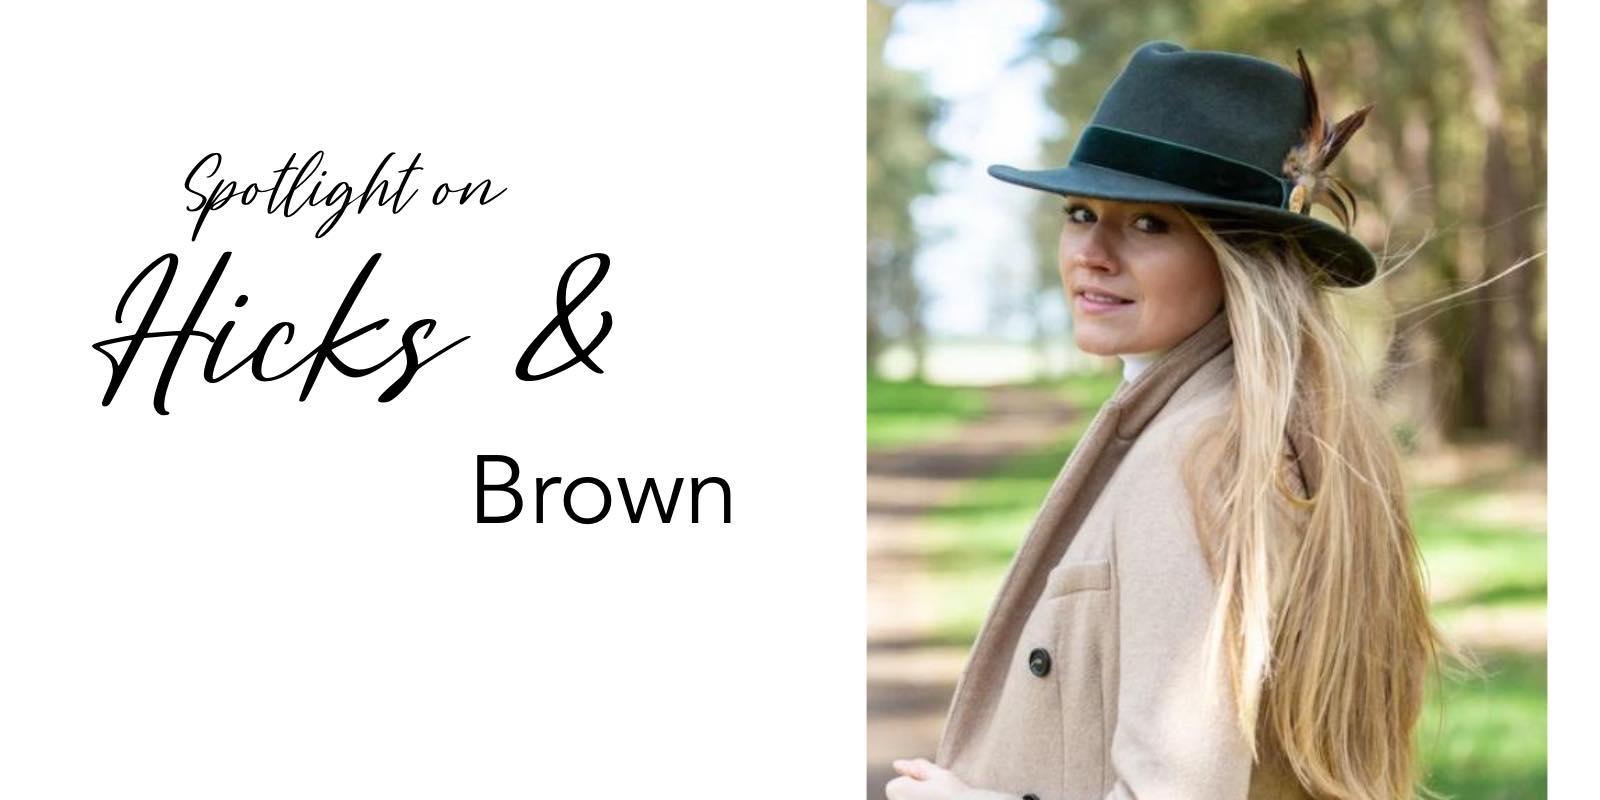 Hicks & Brown - Accessories You'll Love Wearing